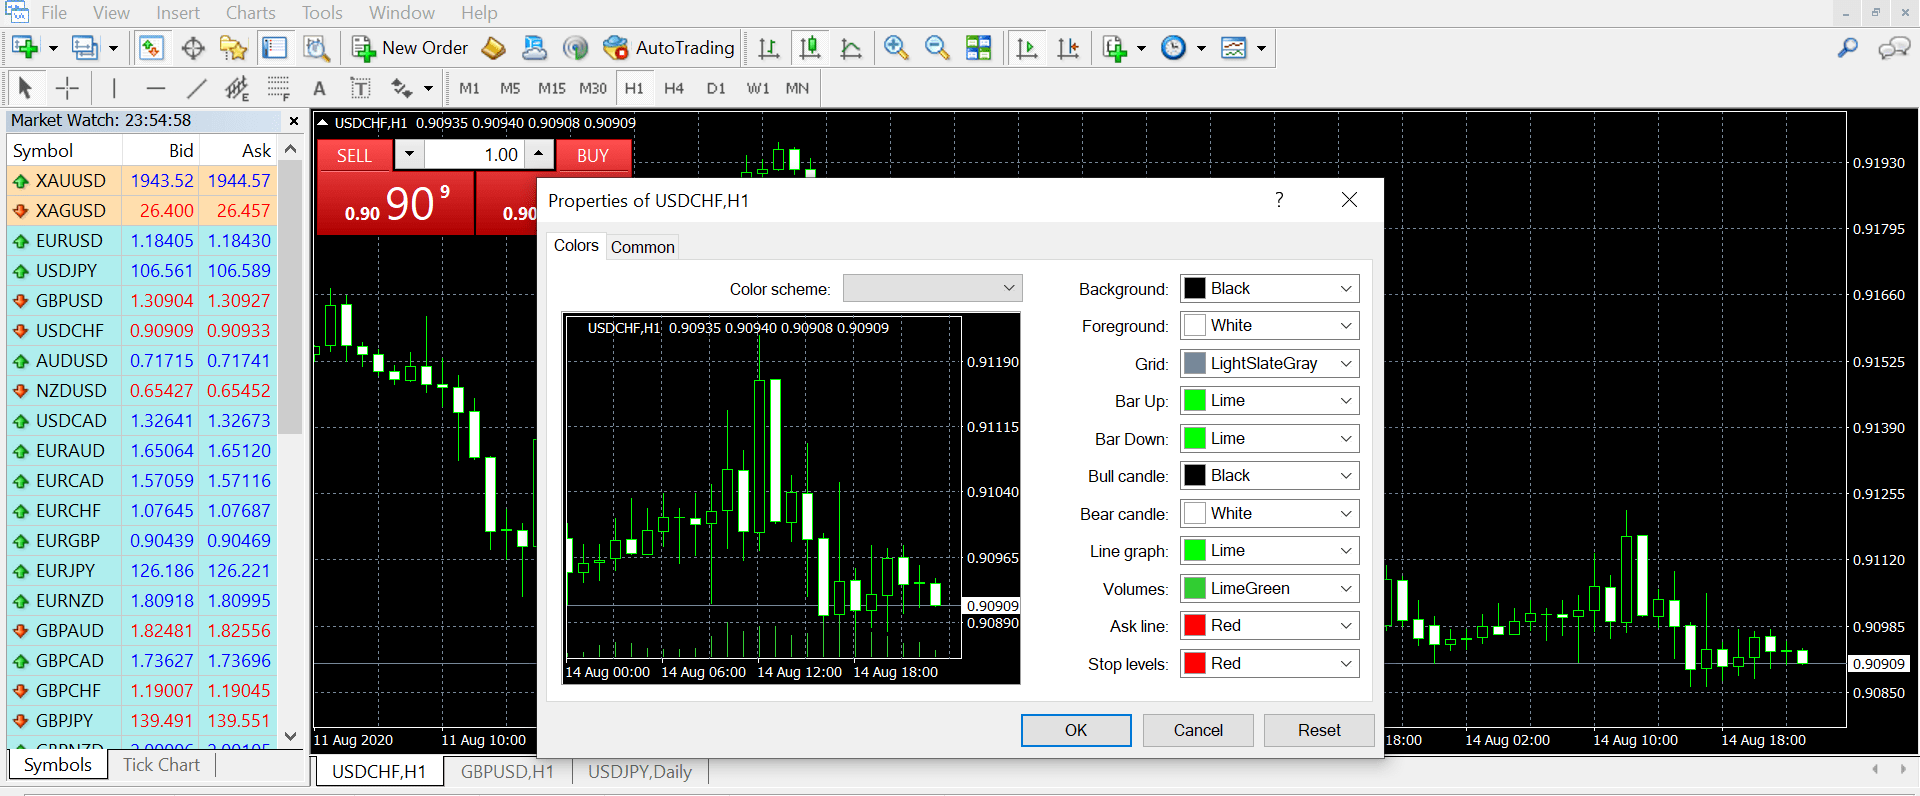 tradingplatforms-metatrader4-whatismt4-and-howtouseit-properties-image